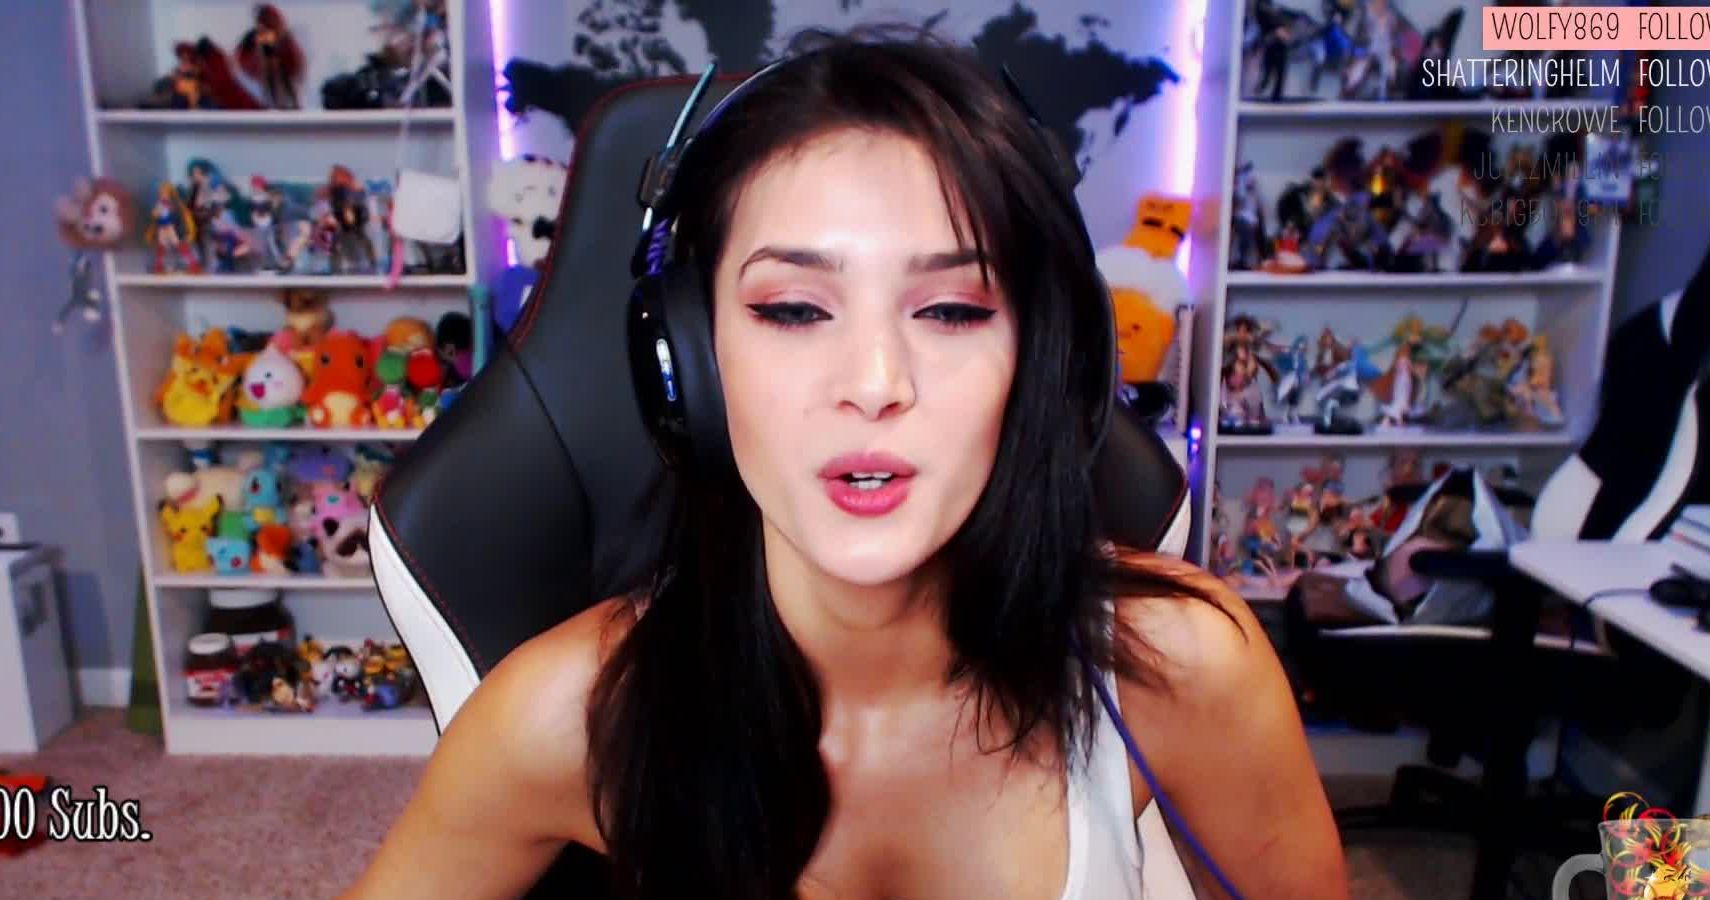 Picture of CinCinBear sorted by. relevance. 